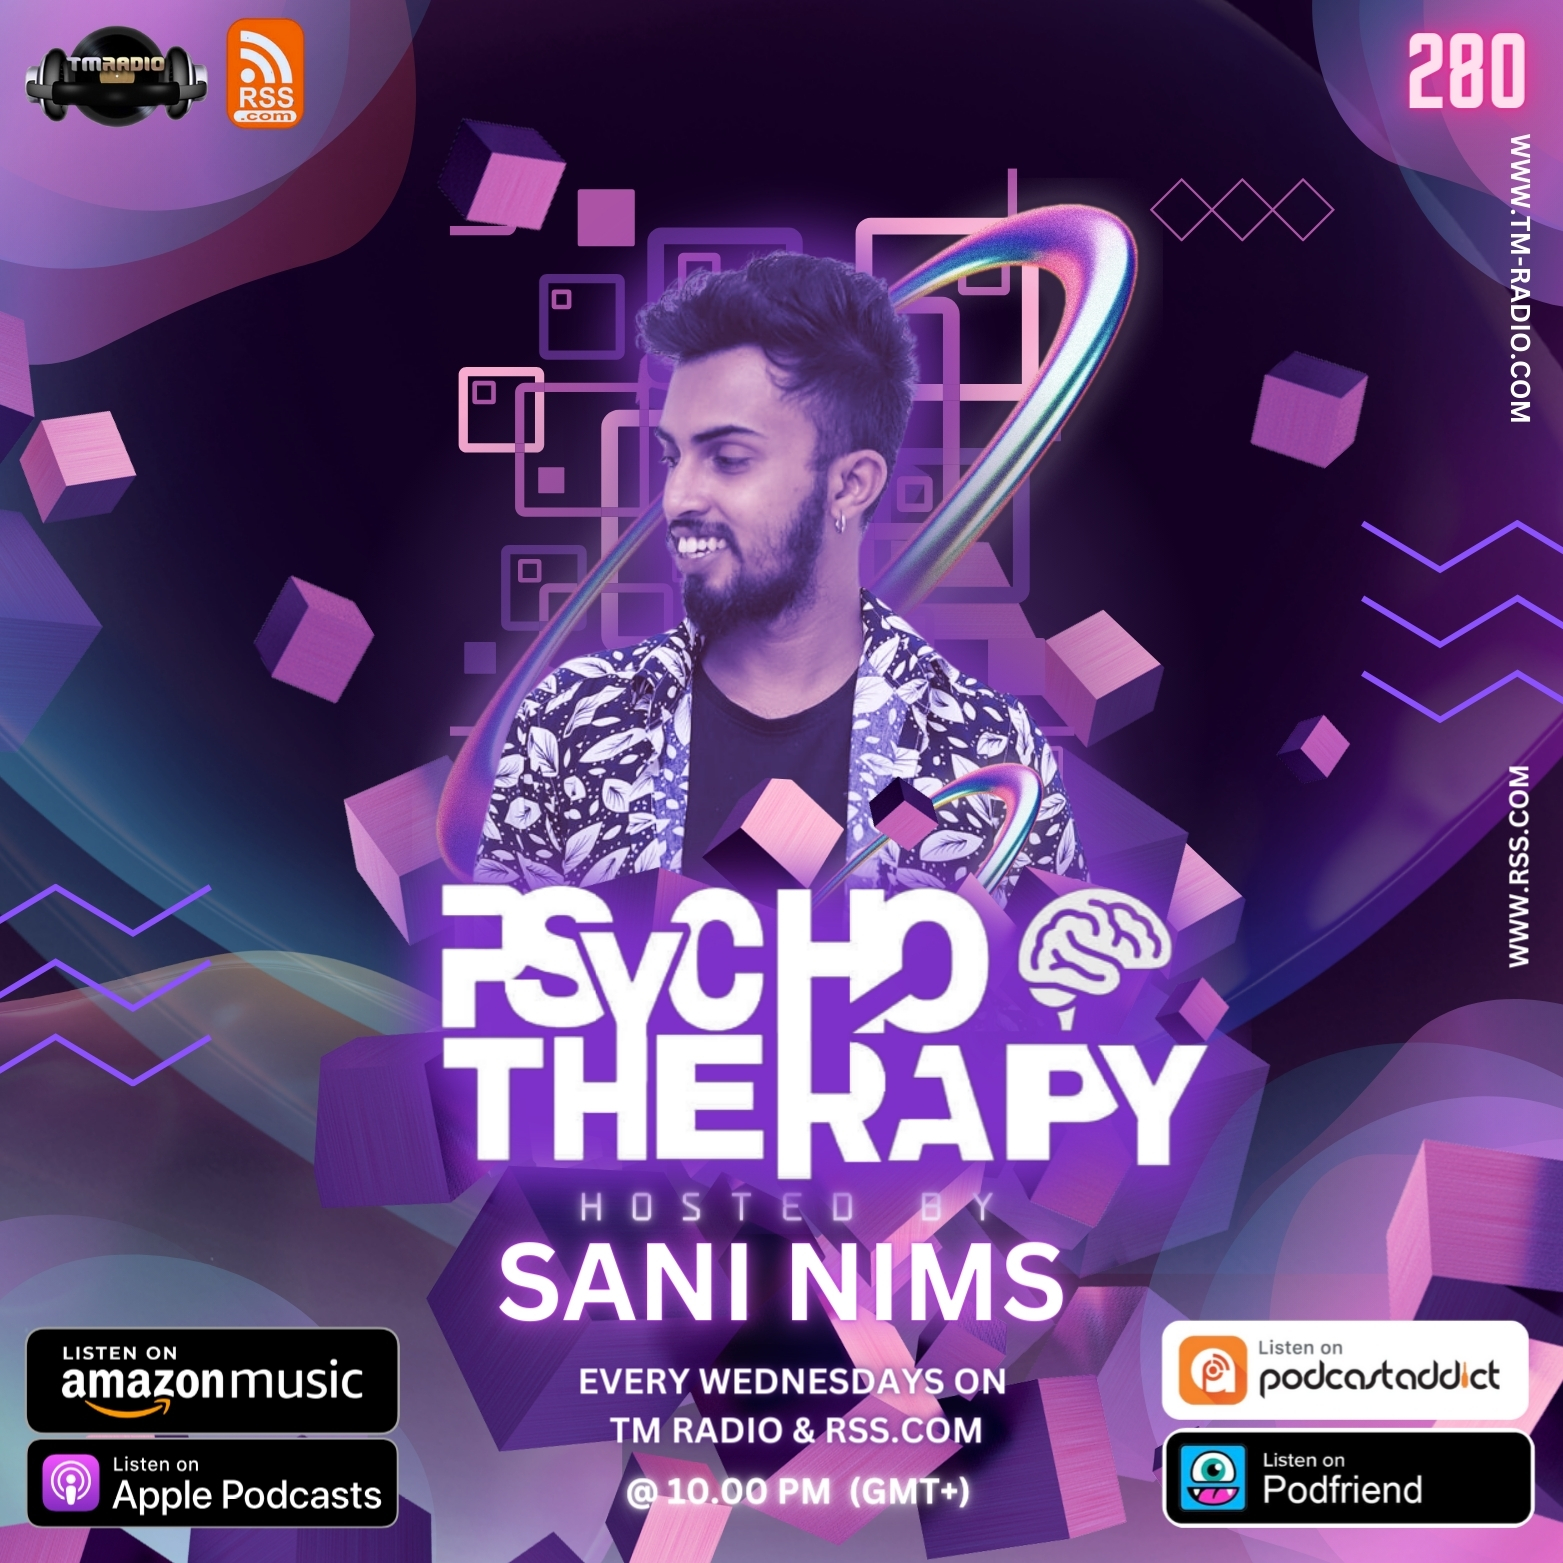 PSYCHO THERAPY EP 280 BY SANI NIMS ON TM RADIO (from February 14th)